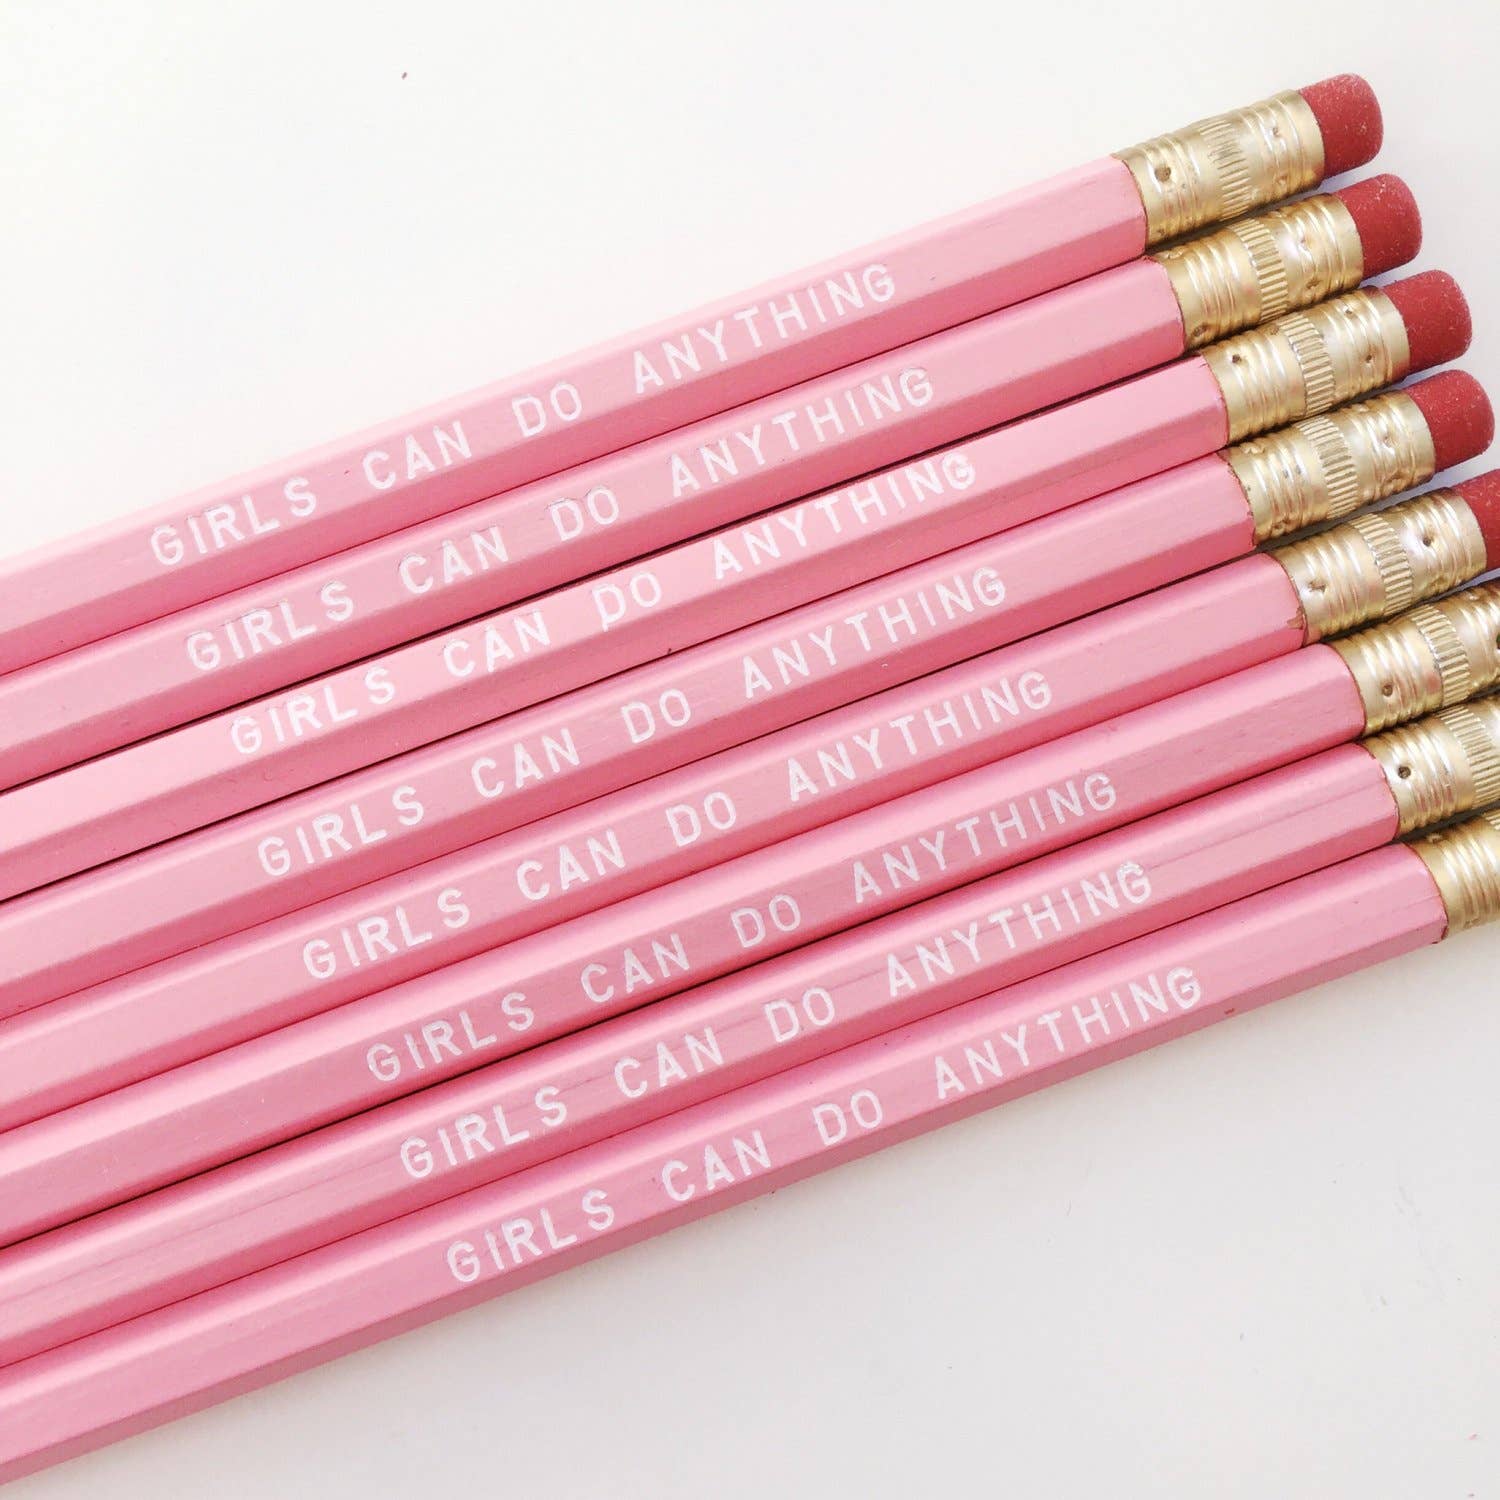 Girls Can Do Anything Pencils - [ash-ling] Booksellers